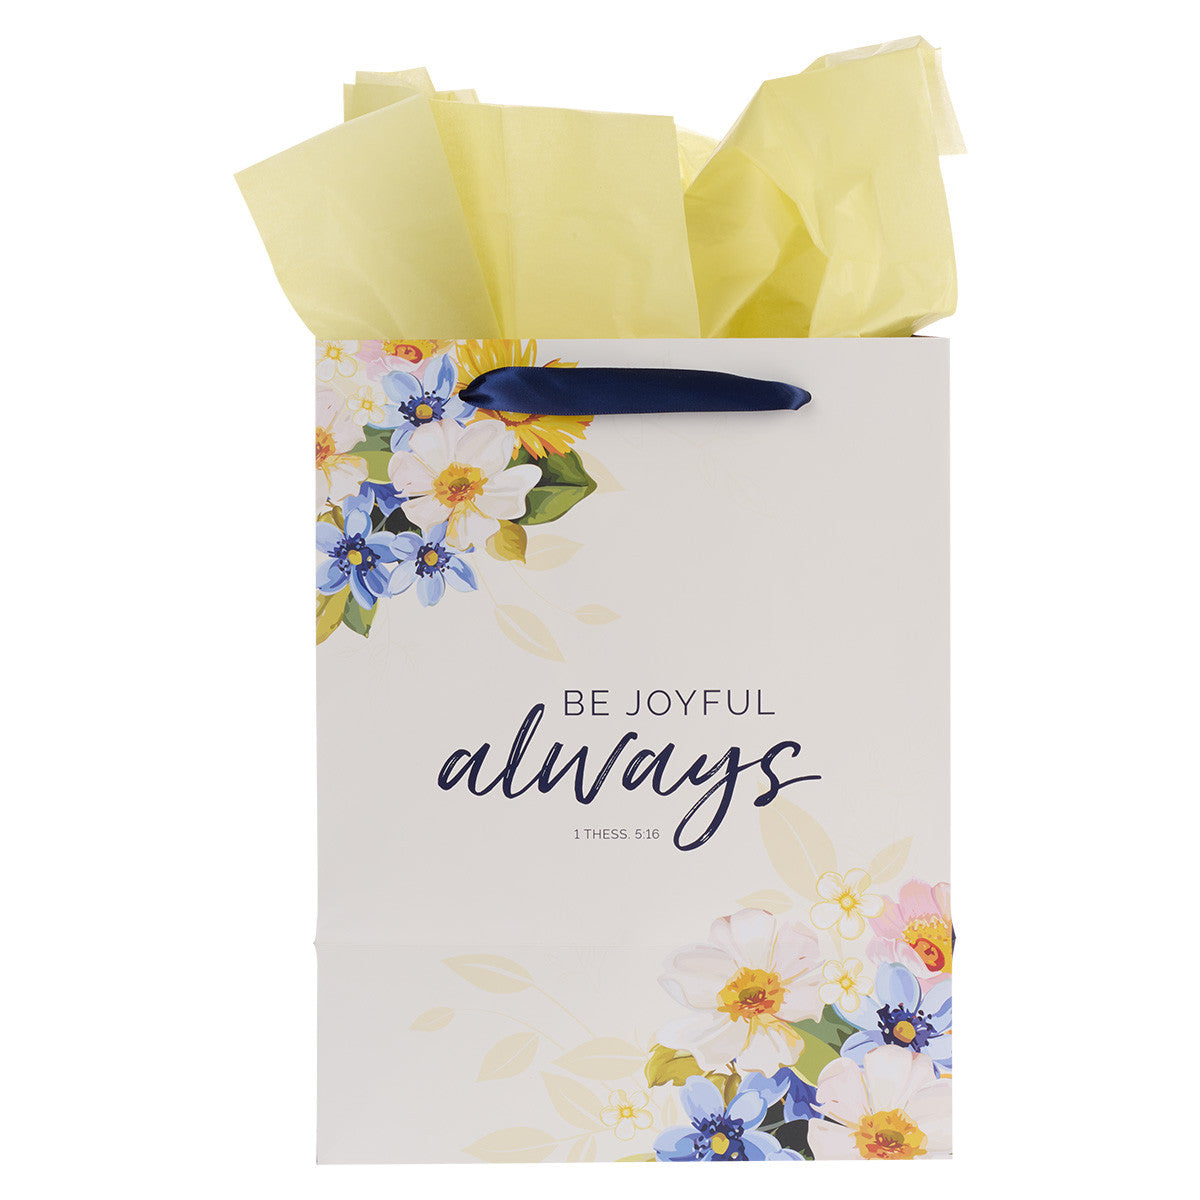 Be Joyful Always Yellow and Navy Blue Floral Portrait Gift Bag with Card Set – 1 Thessalonians 5:16 - The Christian Gift Company